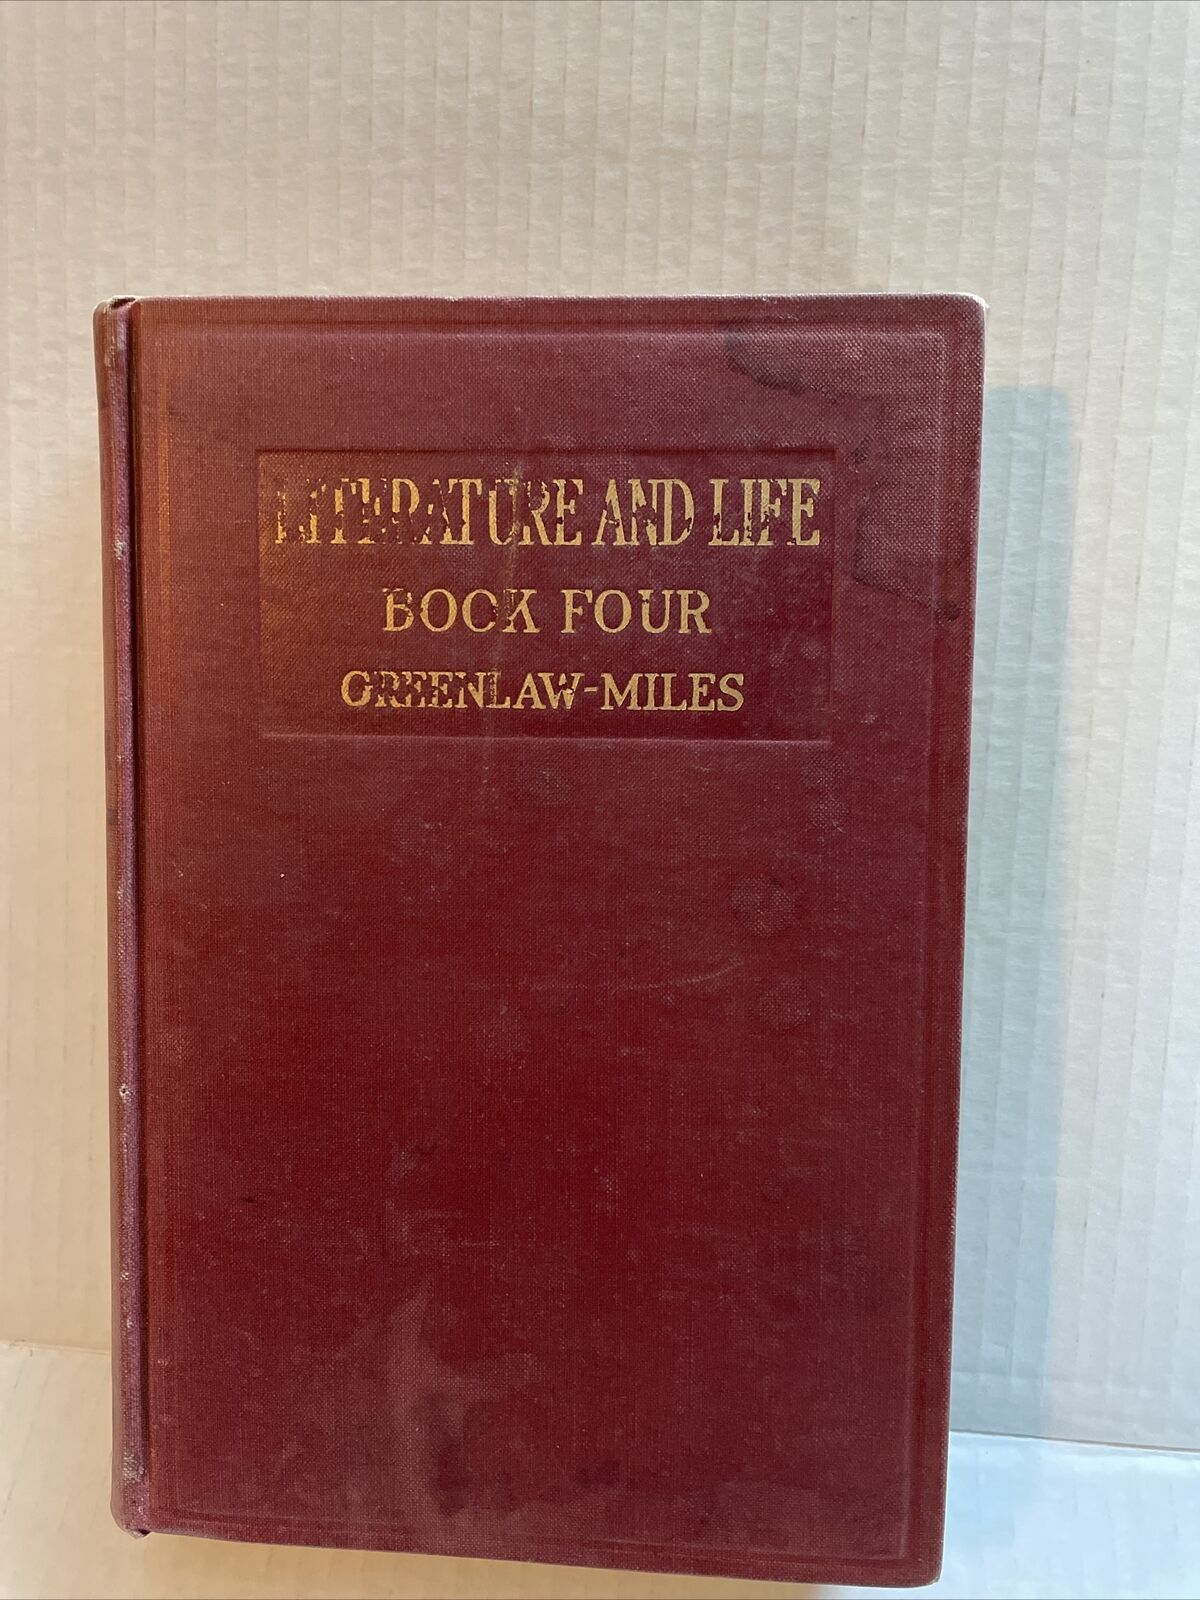 Vintage 100 Yr Old Literature And Life Book Four By Edwin Greenlaw 